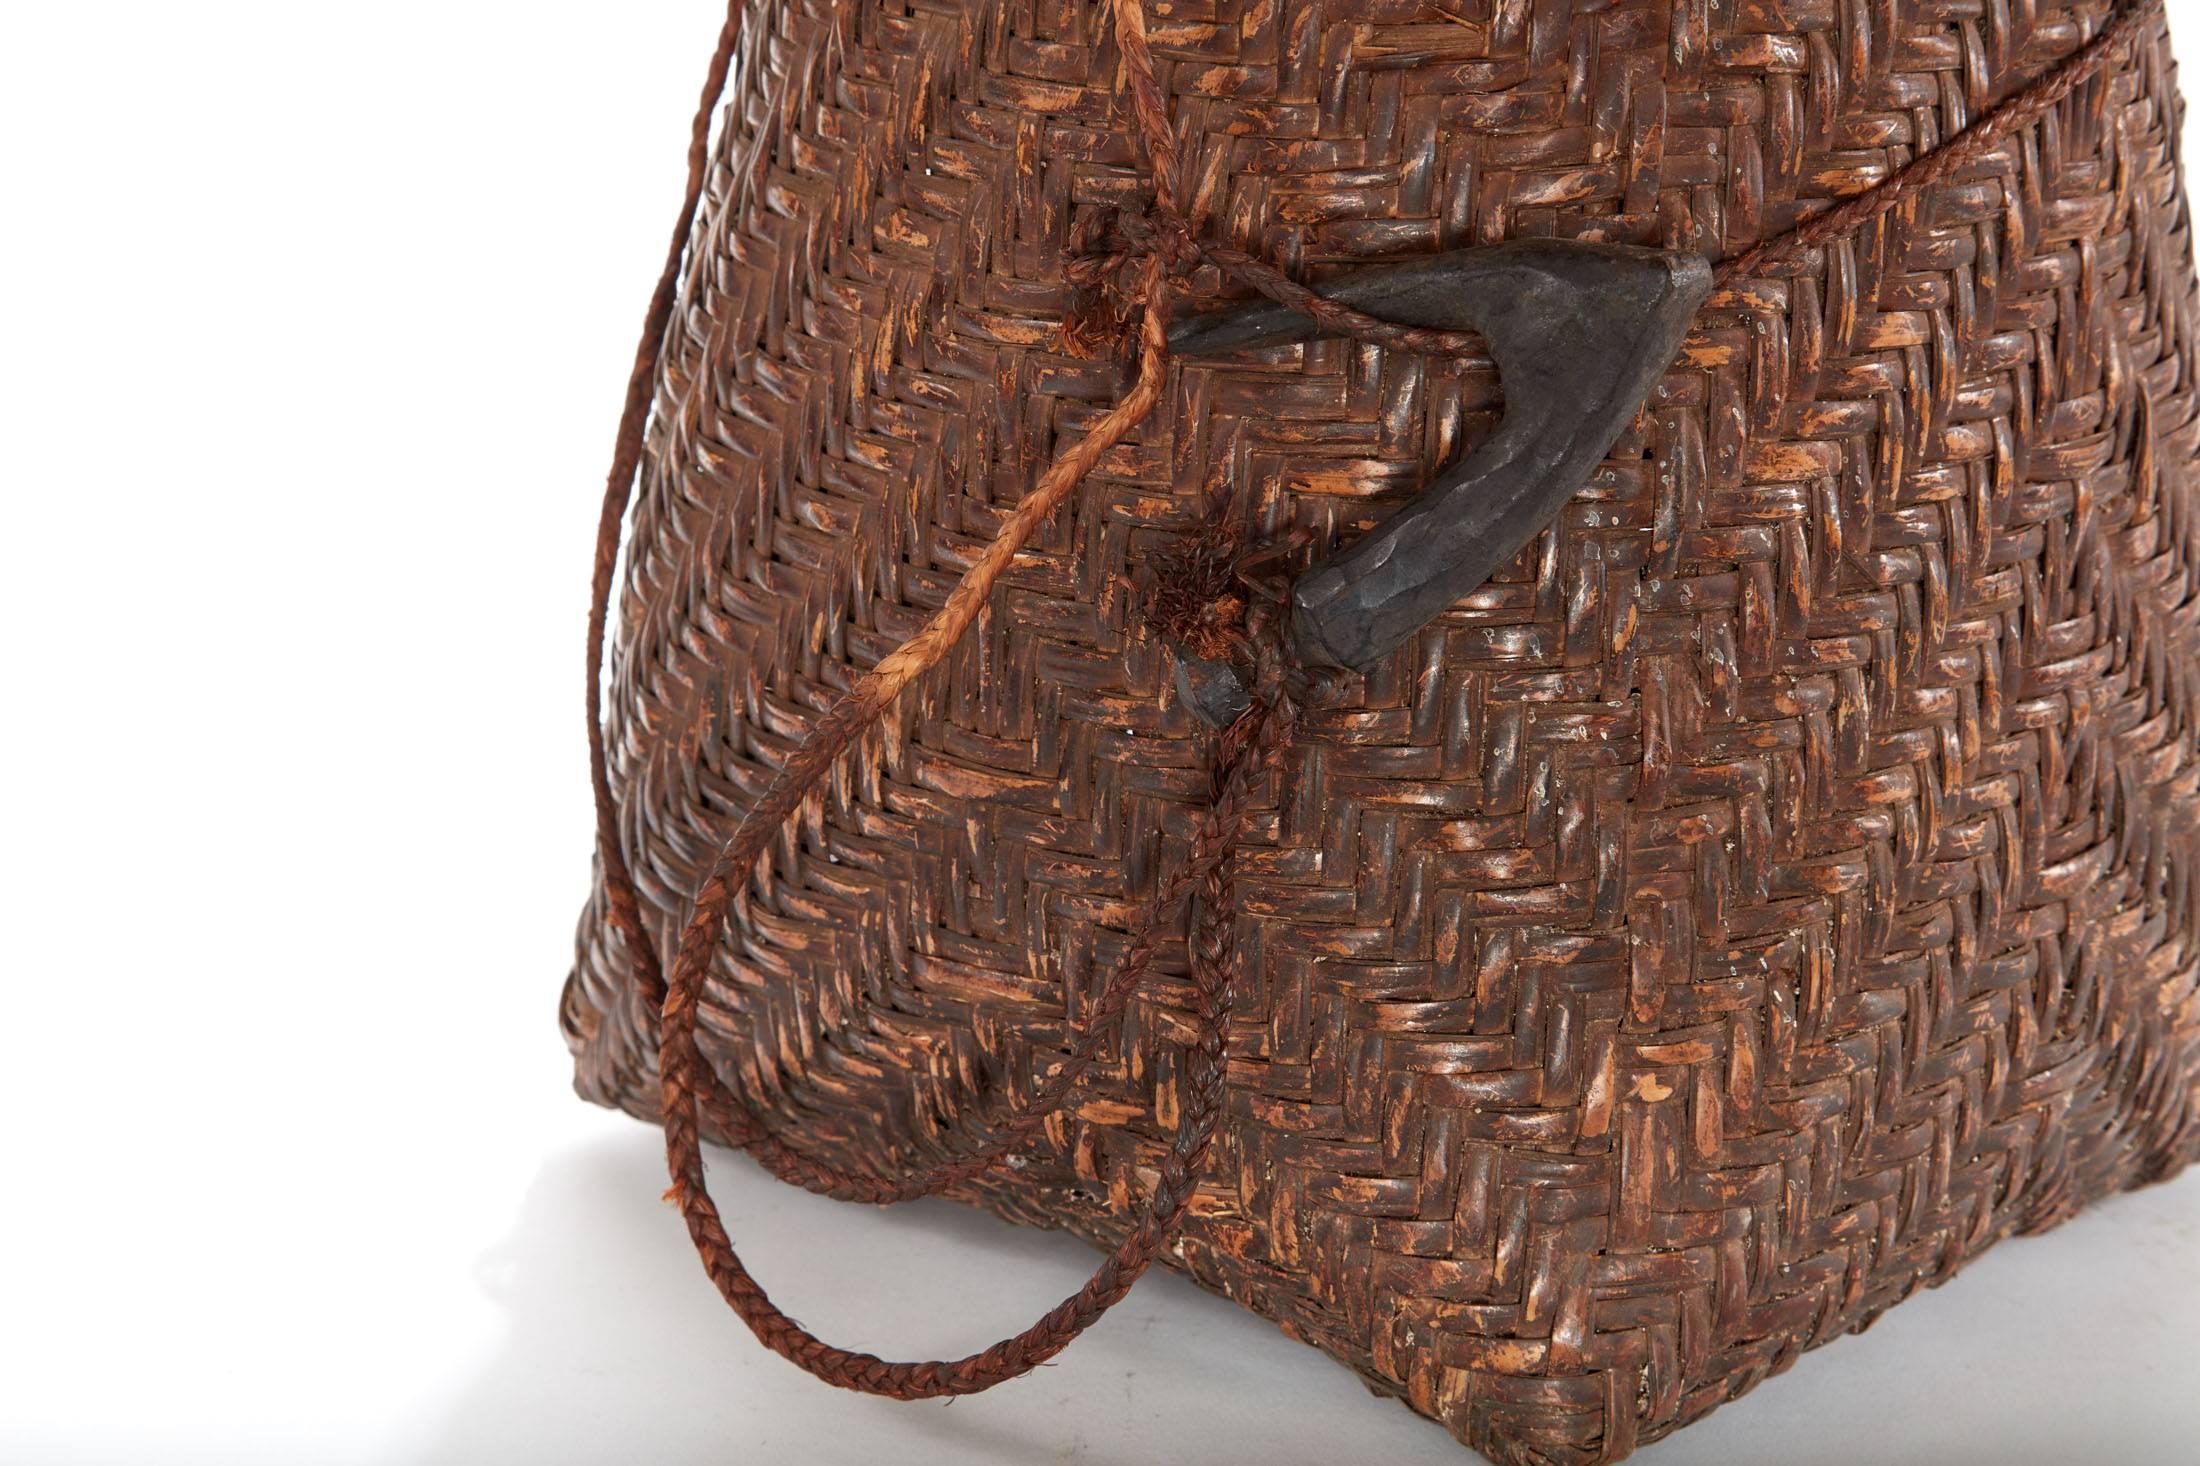 Pair of 20th century woven Nigerian baskets 


Large basket dimensions: 14.5 inch H x 11.5 inch W x 11.5 inch D for basket; Lid: 4 inch H x 10.5 inch W x 10.5 inch D.
Large basket total dimensions of 15.5 inch H x 11.5 inch W x 11.5 inch D.
Small